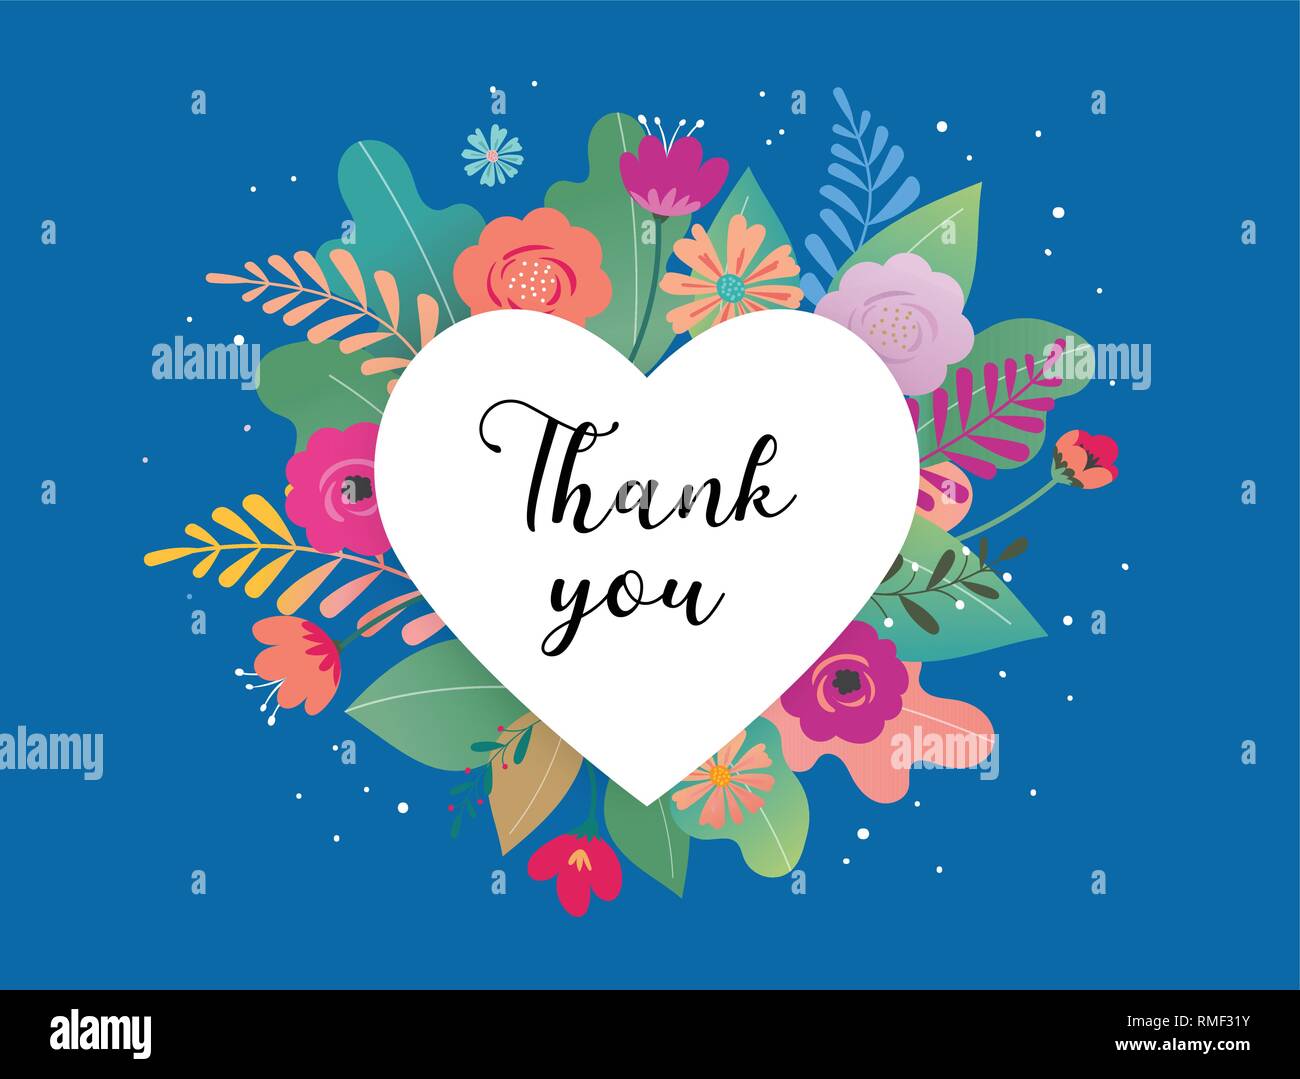 Thanks Cards Backgrounds Photos And Templates Ppt Backgrounds